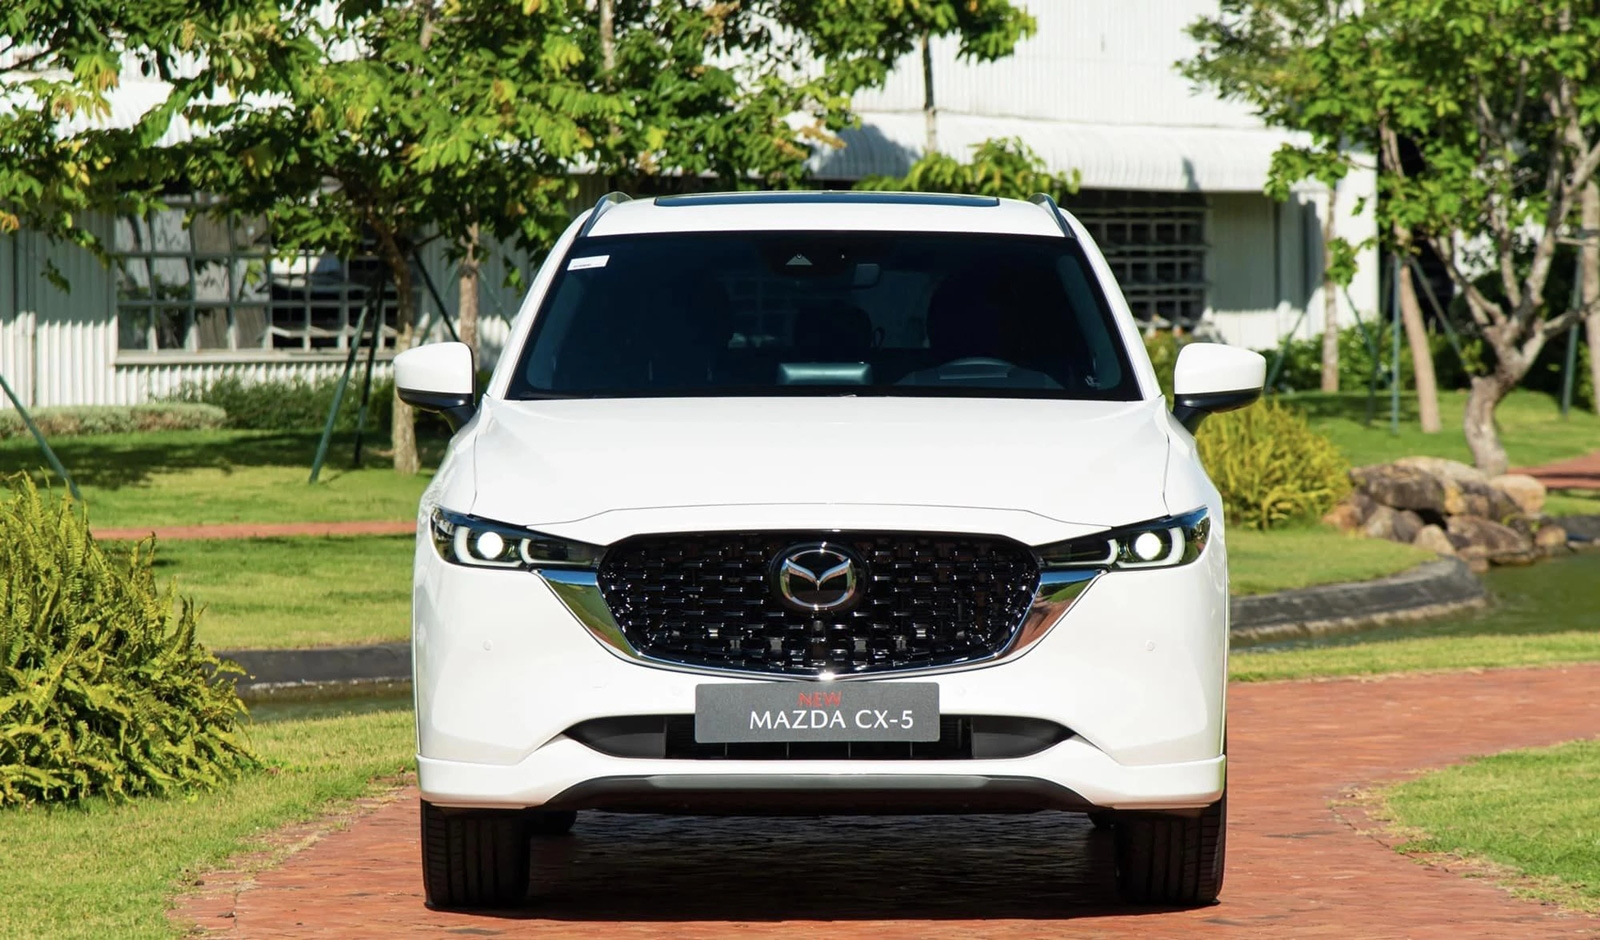 The Mazda CX-5 has 2 engine options, including a 2.0L engine with 154 horsepower and a 2.5L engine with 188 horsepower.  While all 3 versions of the rival Honda CR-V have the Sensing package, the Mazda CX-5 also 